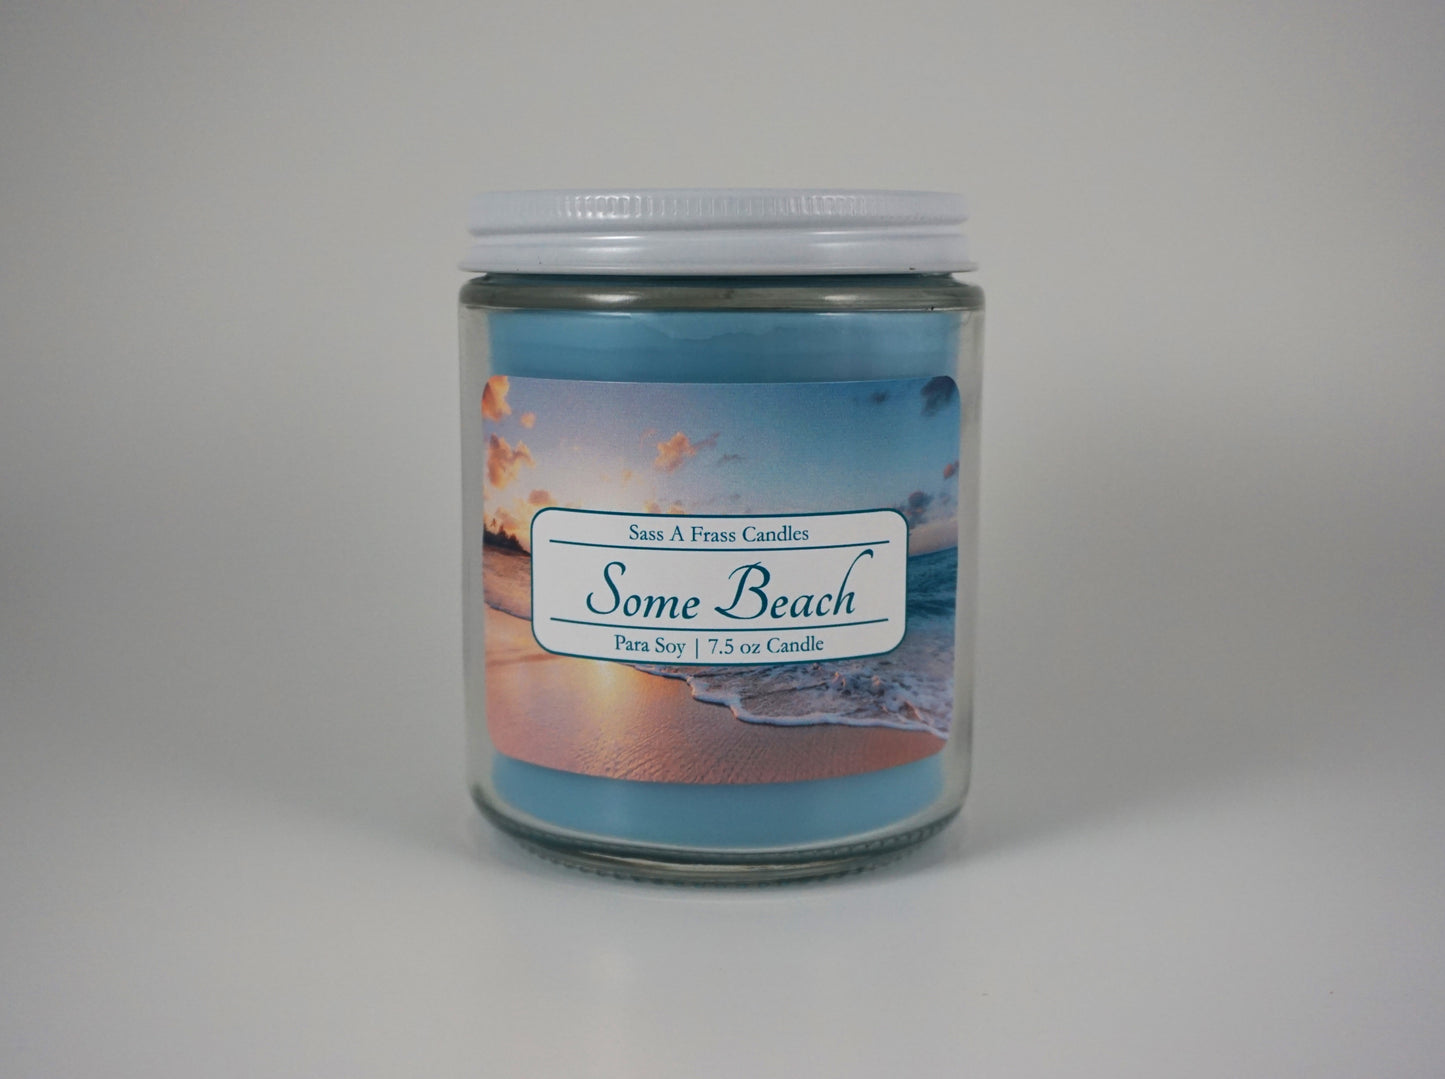 Some Beach 7.5 oz Candle